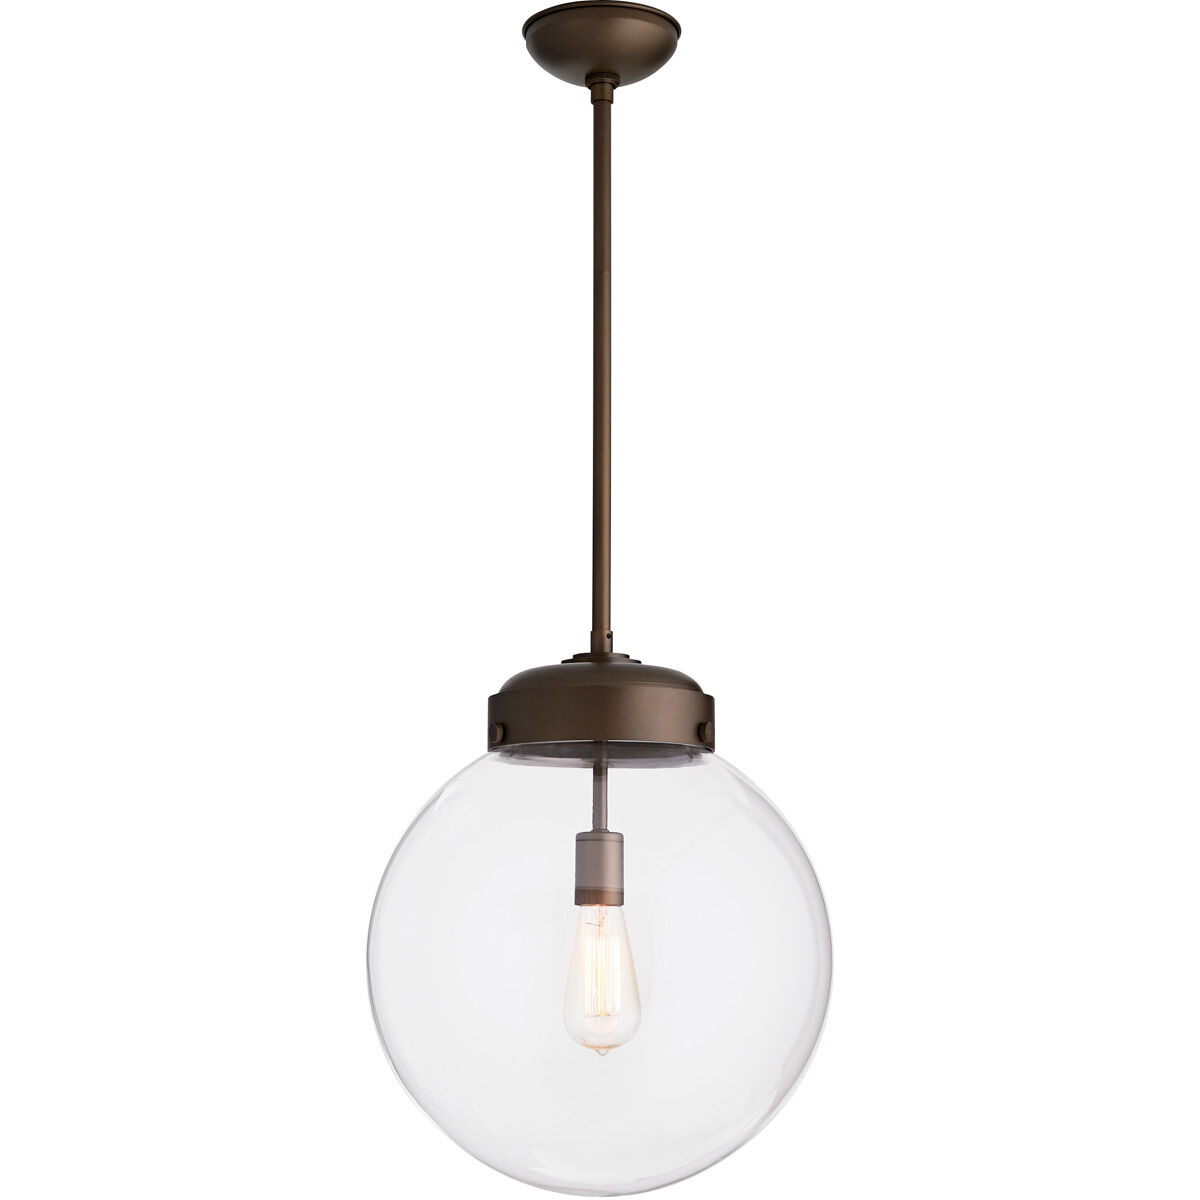 Arteriors 49208 Reeves 1 Light 16 inch Aged Brass Outdoor Pendant